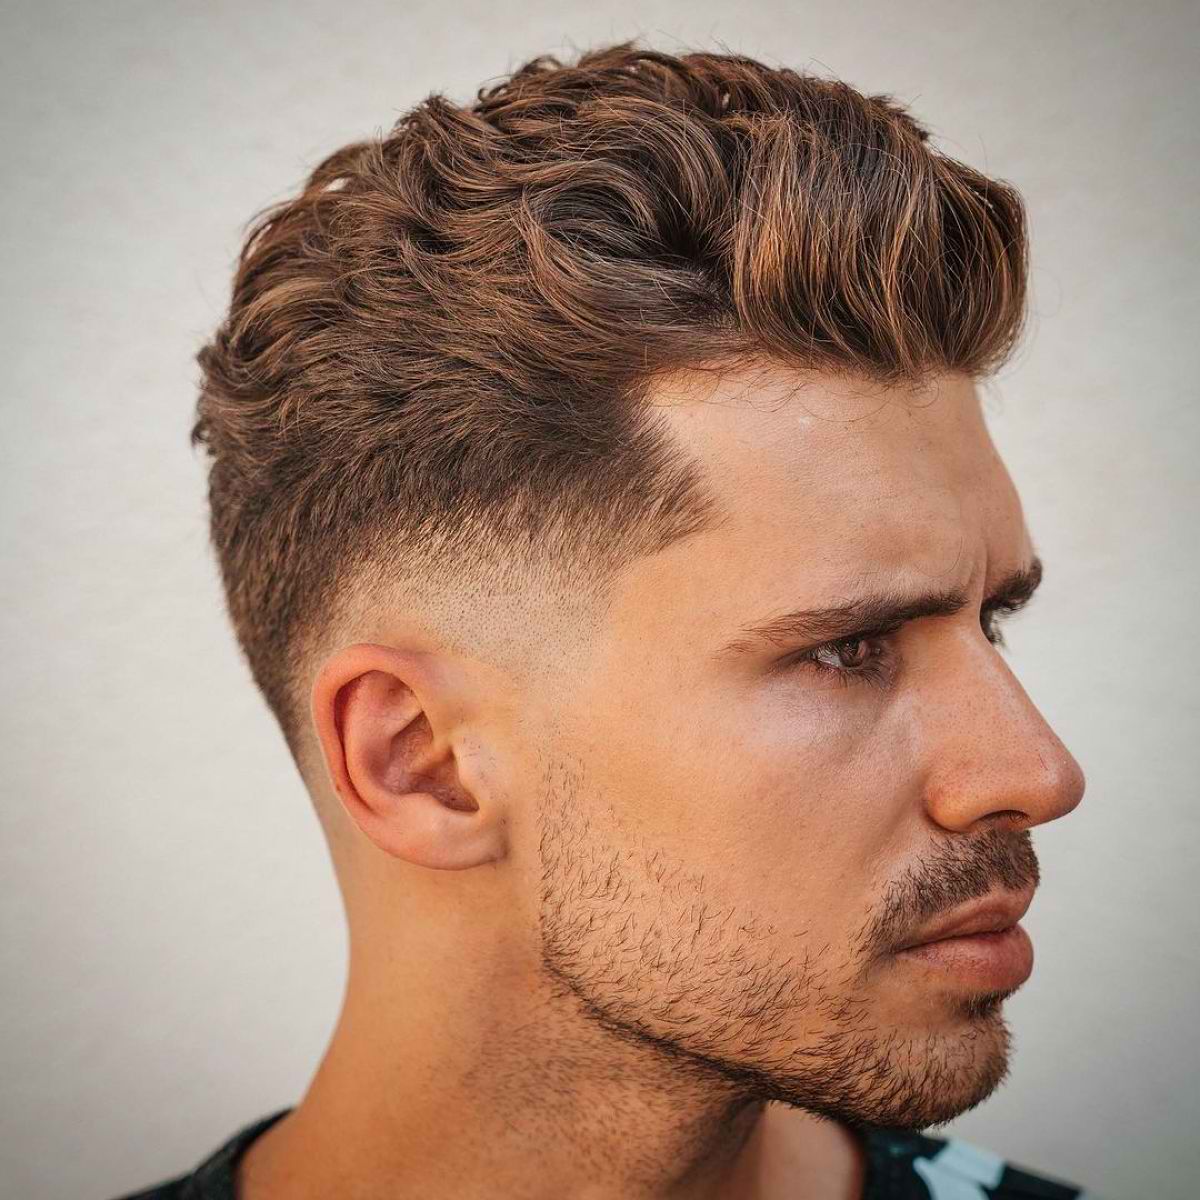 25 Awesome Slicked Back Hairstyles for Stylish Guys